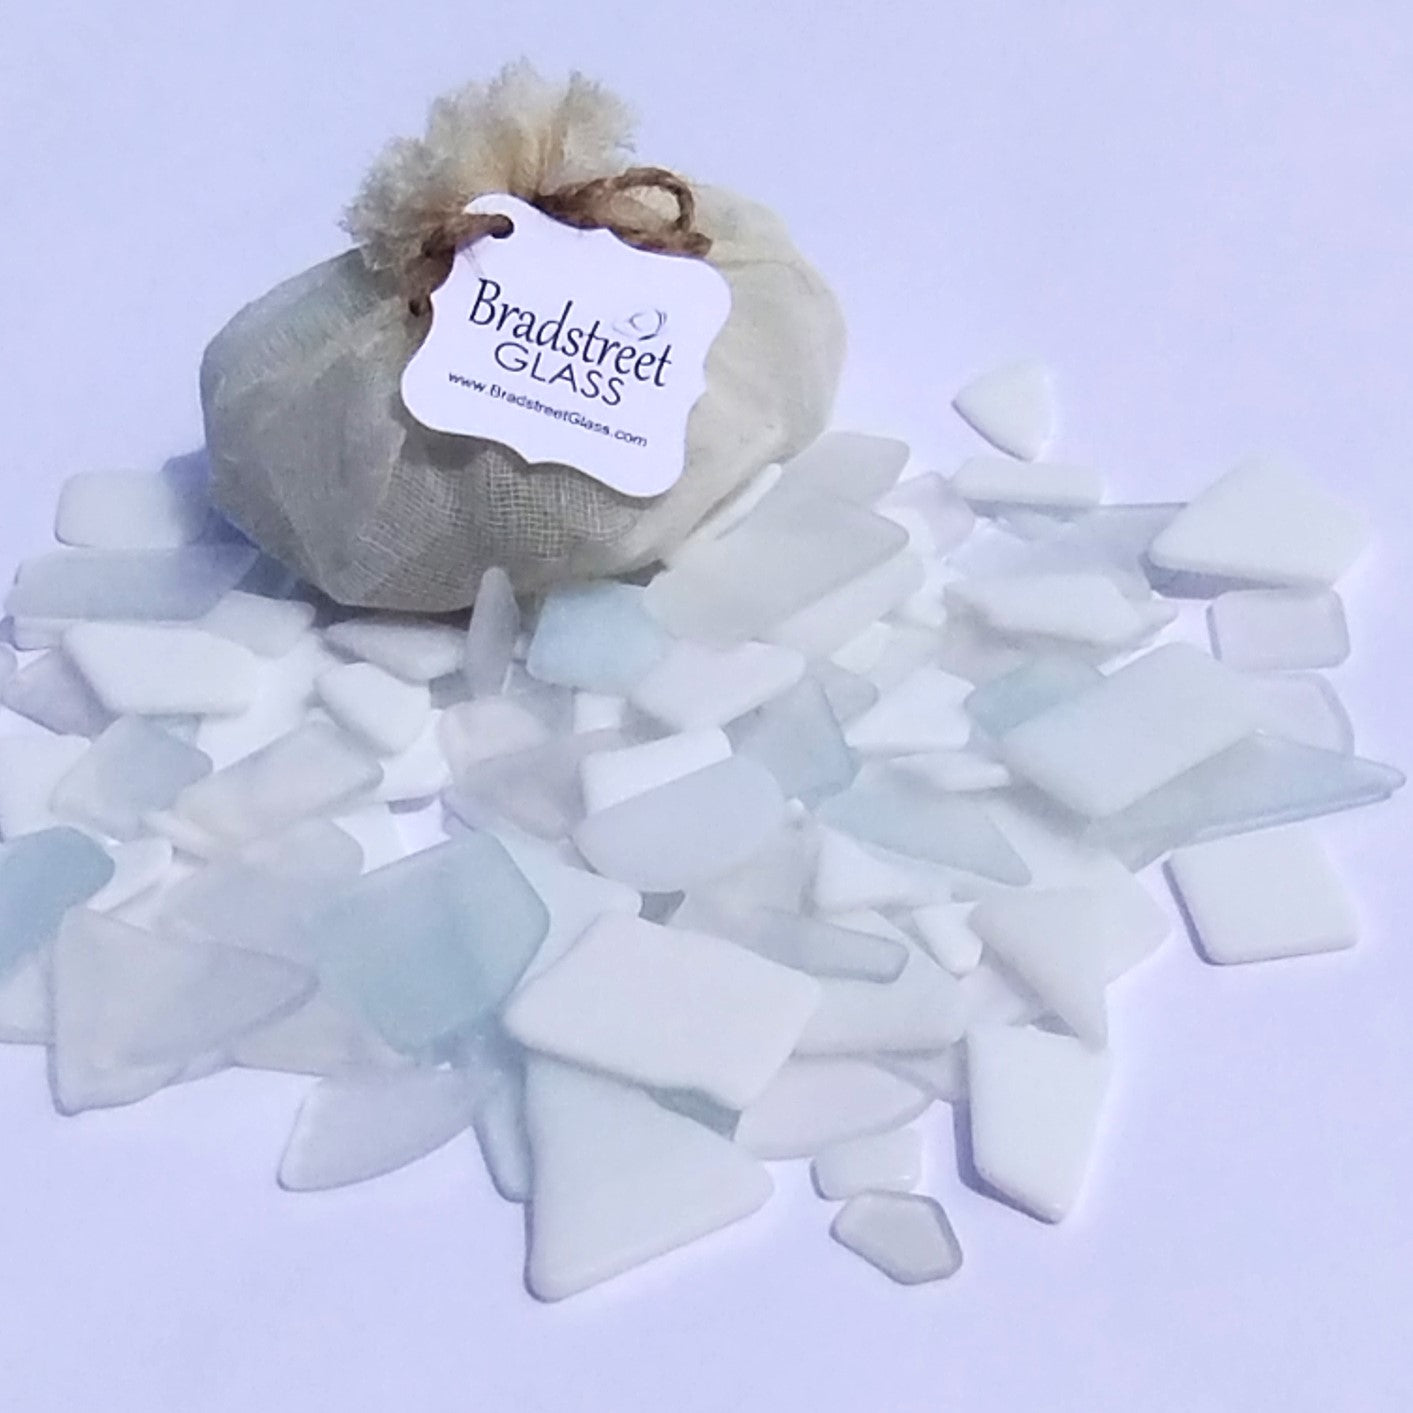 Bradstreet Glass White & Clear Tumbled Stained Glass 1/2 LB "Sea Glass" Pieces in Shades of Clear and White